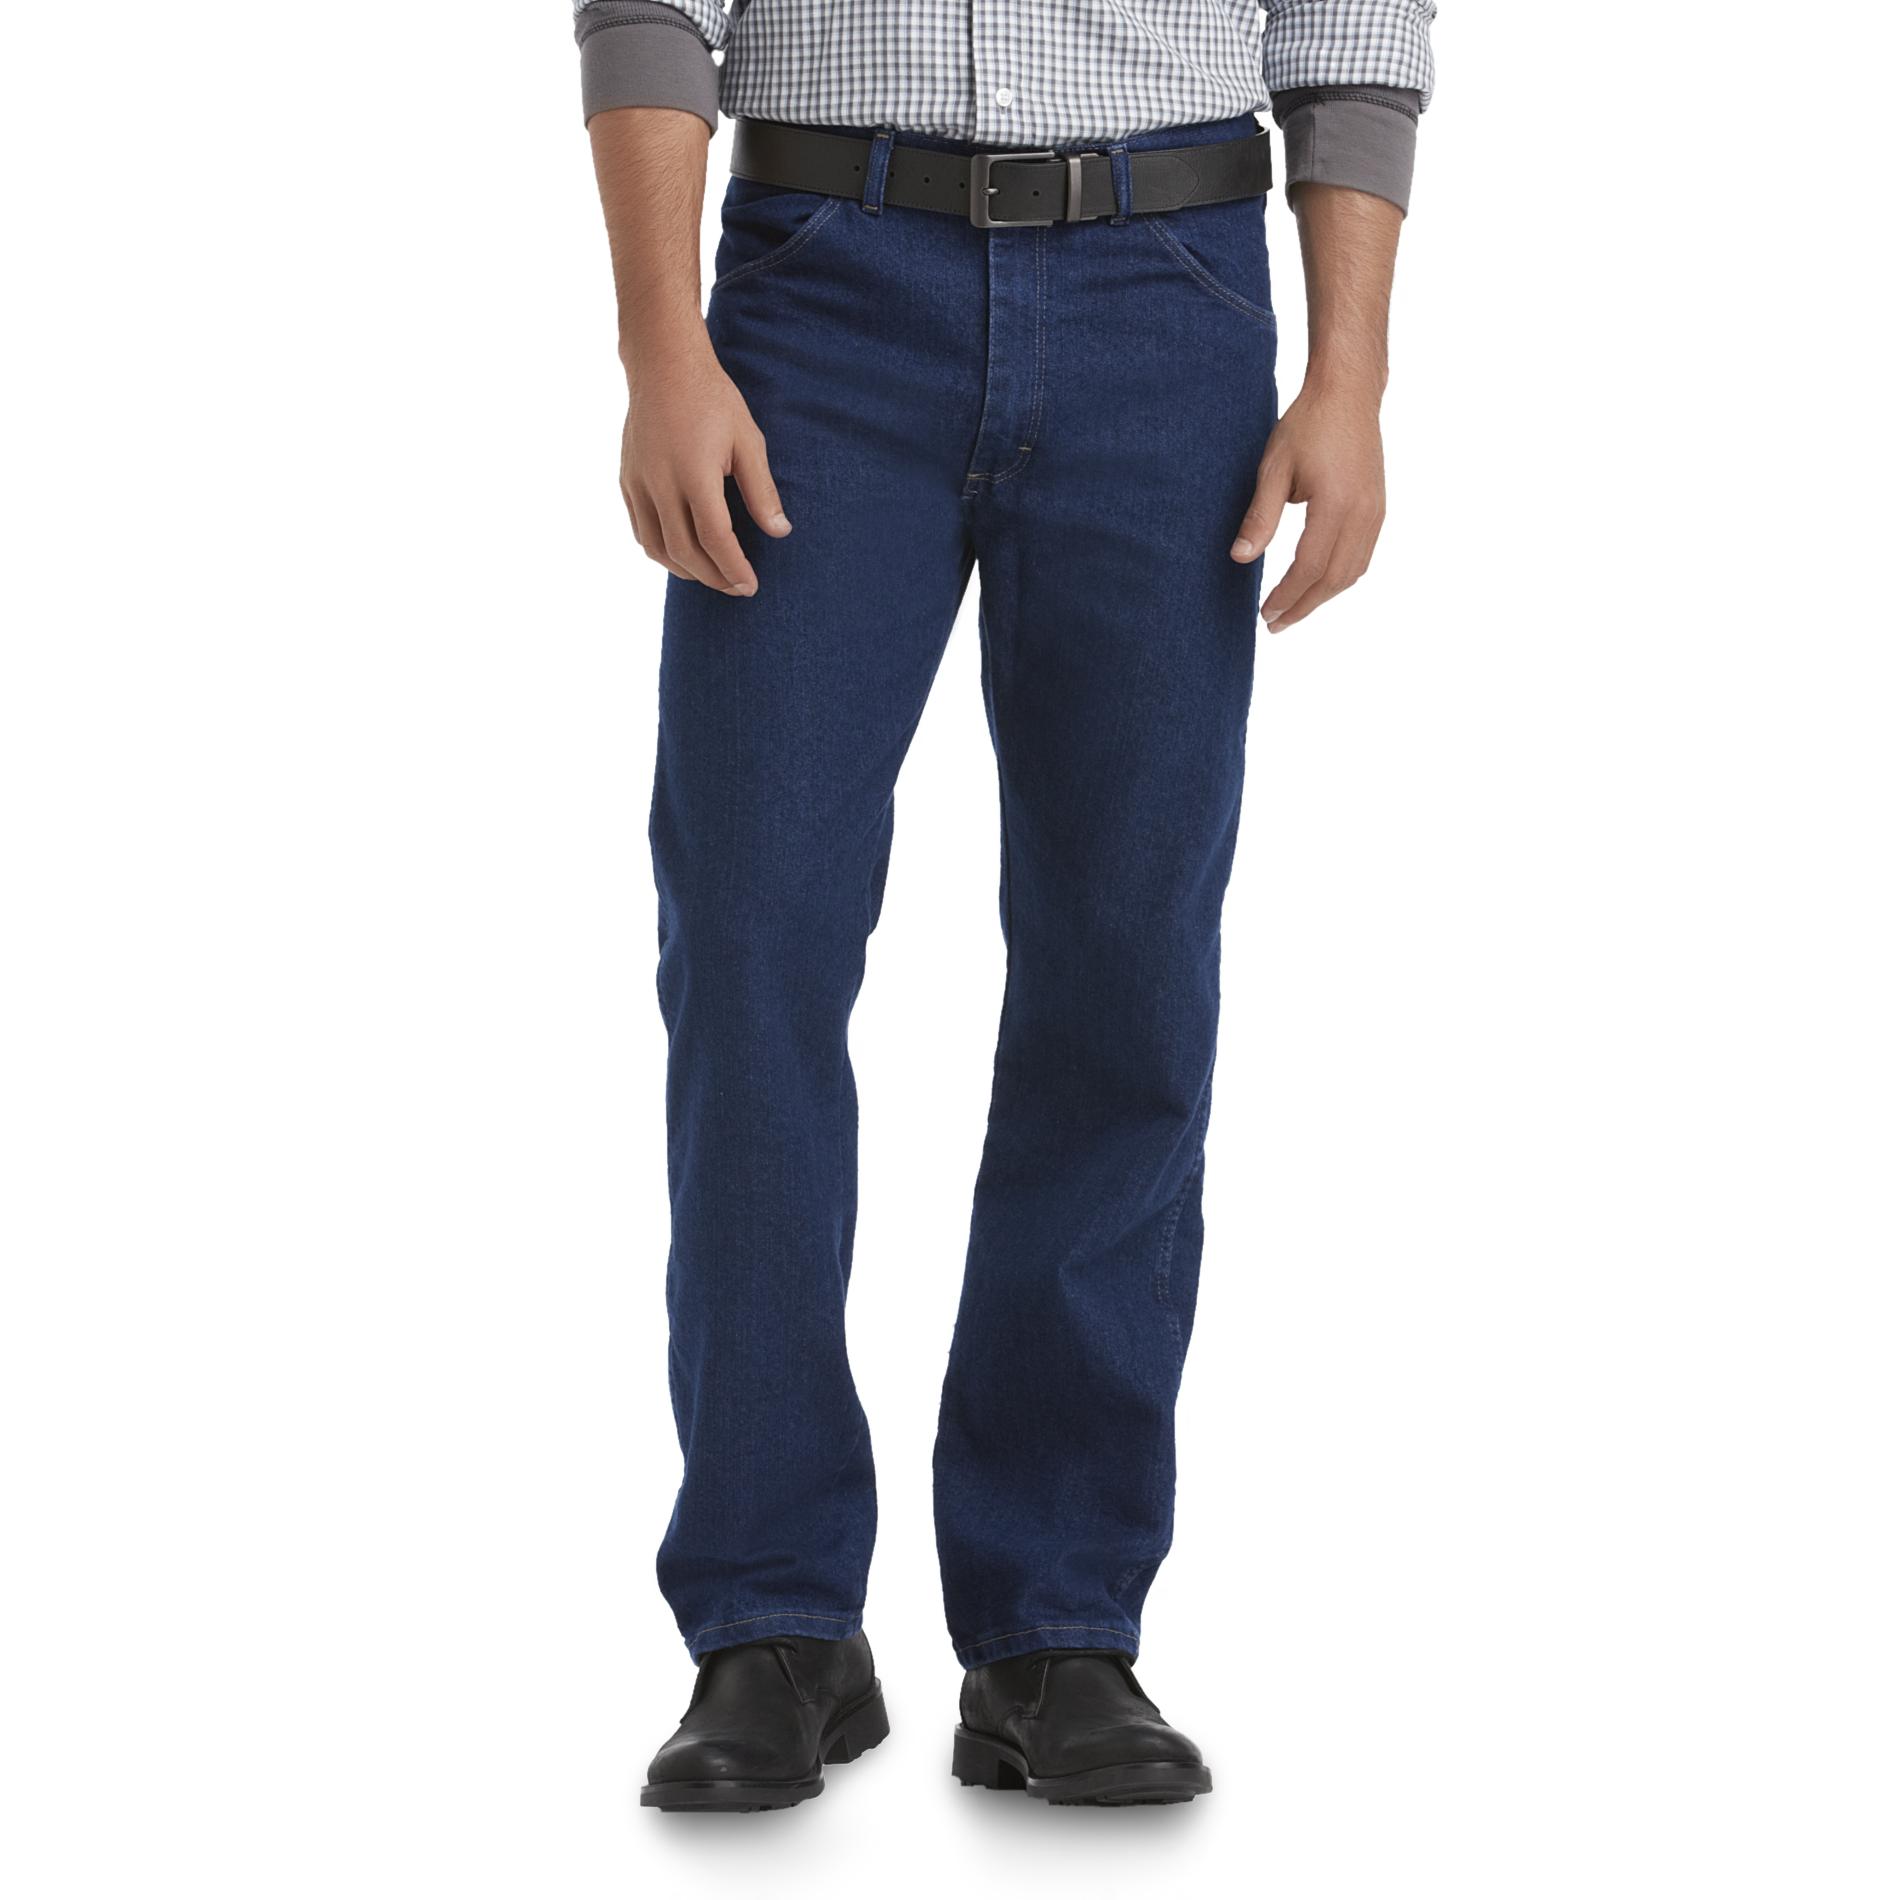 Basic Editions Men's Big & Tall Comfort Action Jeans